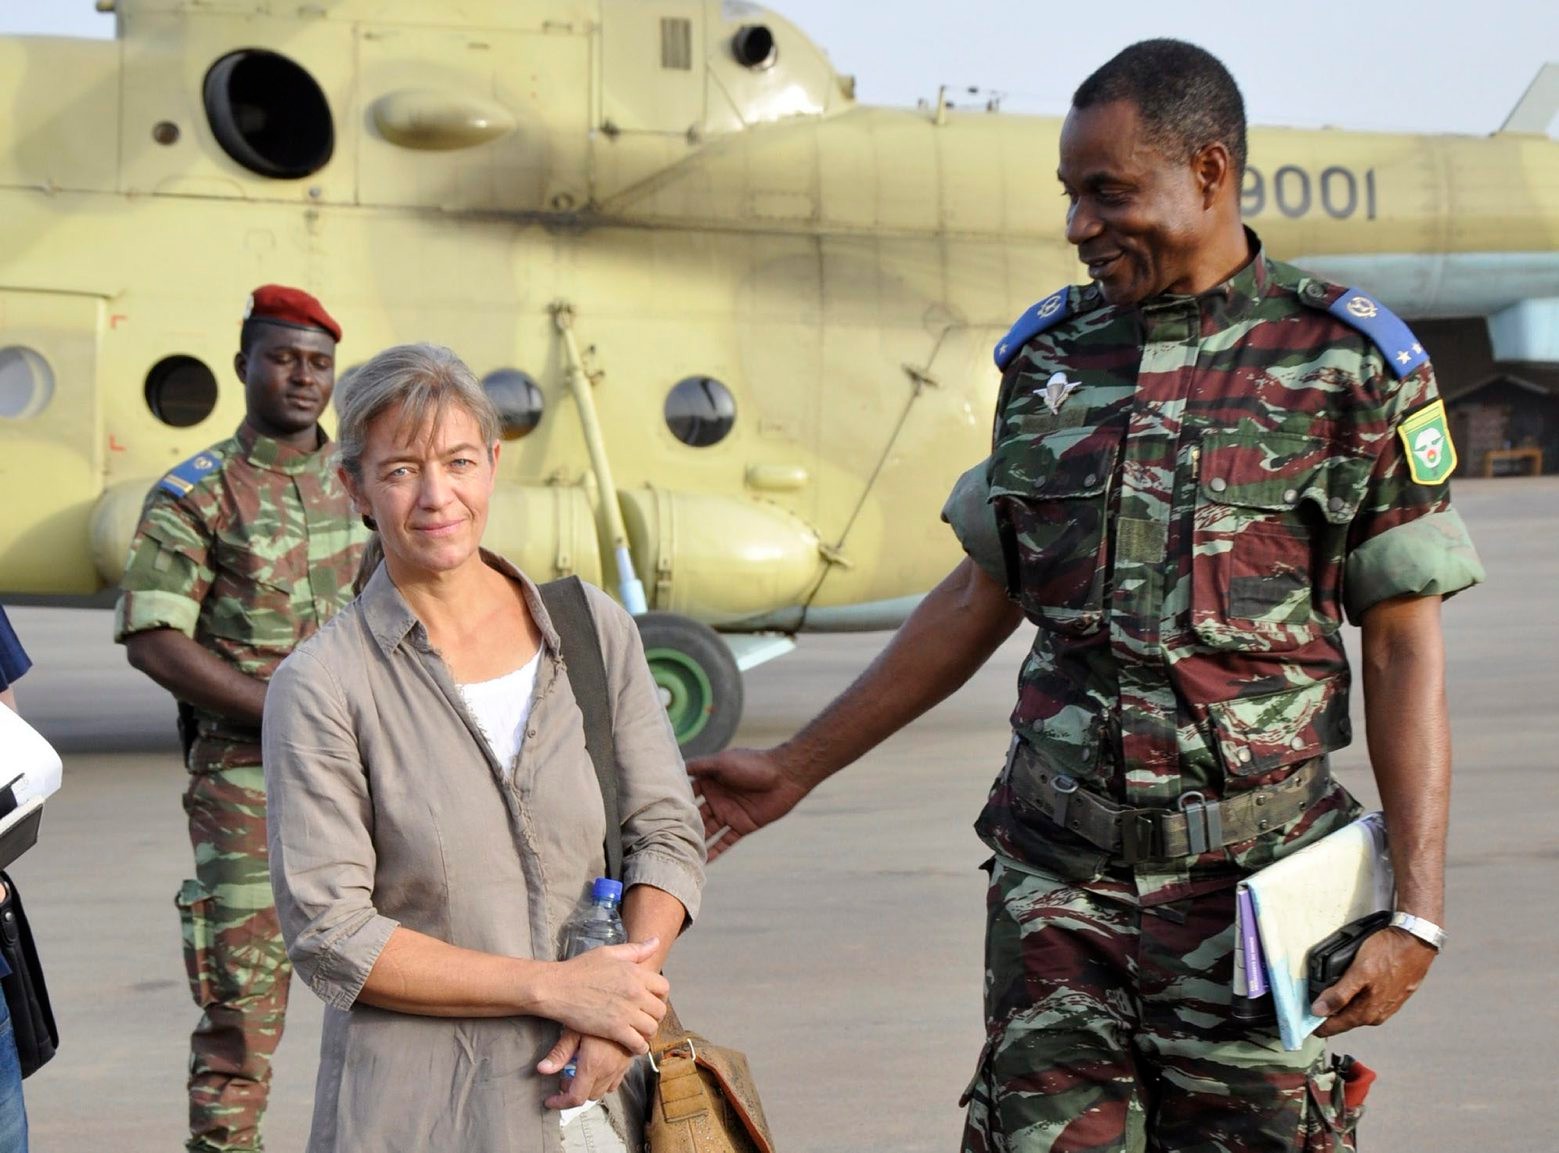 ARCHIVBILD ZU SCHWEIZERIN ZUM 2. MAL IN MALI ENTFUEHRT ---  In this file photo taken Tuesday, April 24, 2012, released Swiss hostage, left, arrives by helicopter from Timbuktu, Mali after being handed over by a militant Islamic group Ansar Dine, in Ouagadougou, Burkina Faso. A Swiss woman who had been briefly abducted back in 2012 was kidnapped again by suspected jihadists who scaled the walls of her home in northern Mali in the middle of the night, authorities said Friday, Jan. 8, 2016,  Witnesses say Beatrice Stockly's door was found open Friday morning in Timbuktu, the town where she returned the year after her first kidnapping. (AP Photo/Brahima Ouedraogo, File) MALI WOMAN ABDUCTED